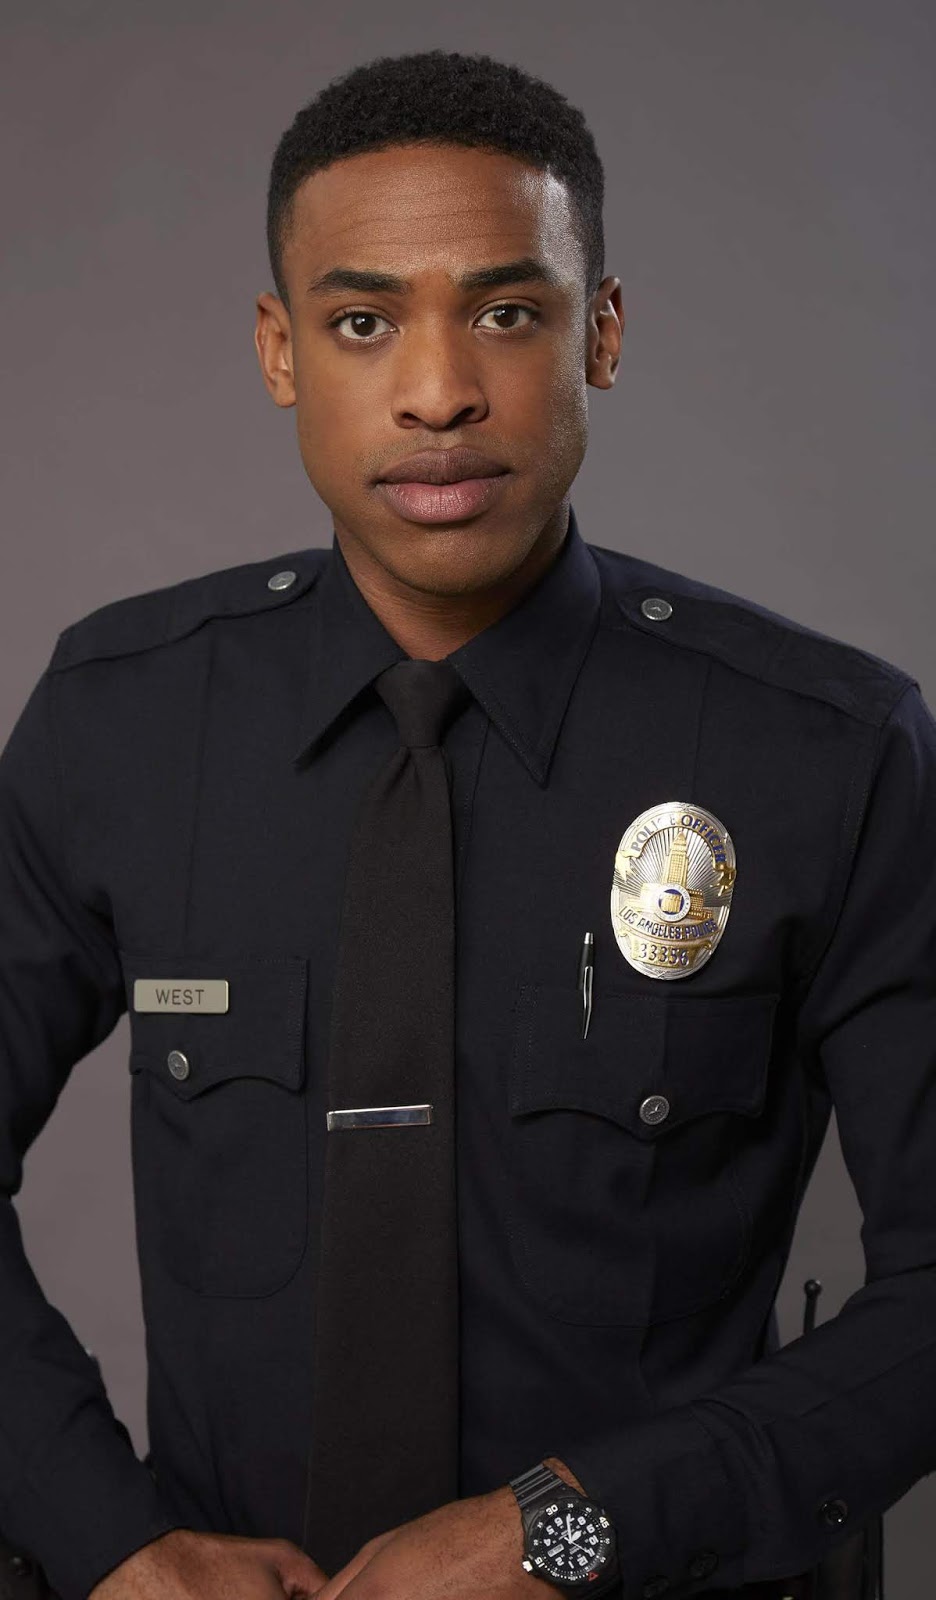 THE ROOKIE Series Trailer, Promos, Clips, Featurette, Images and Poster ...